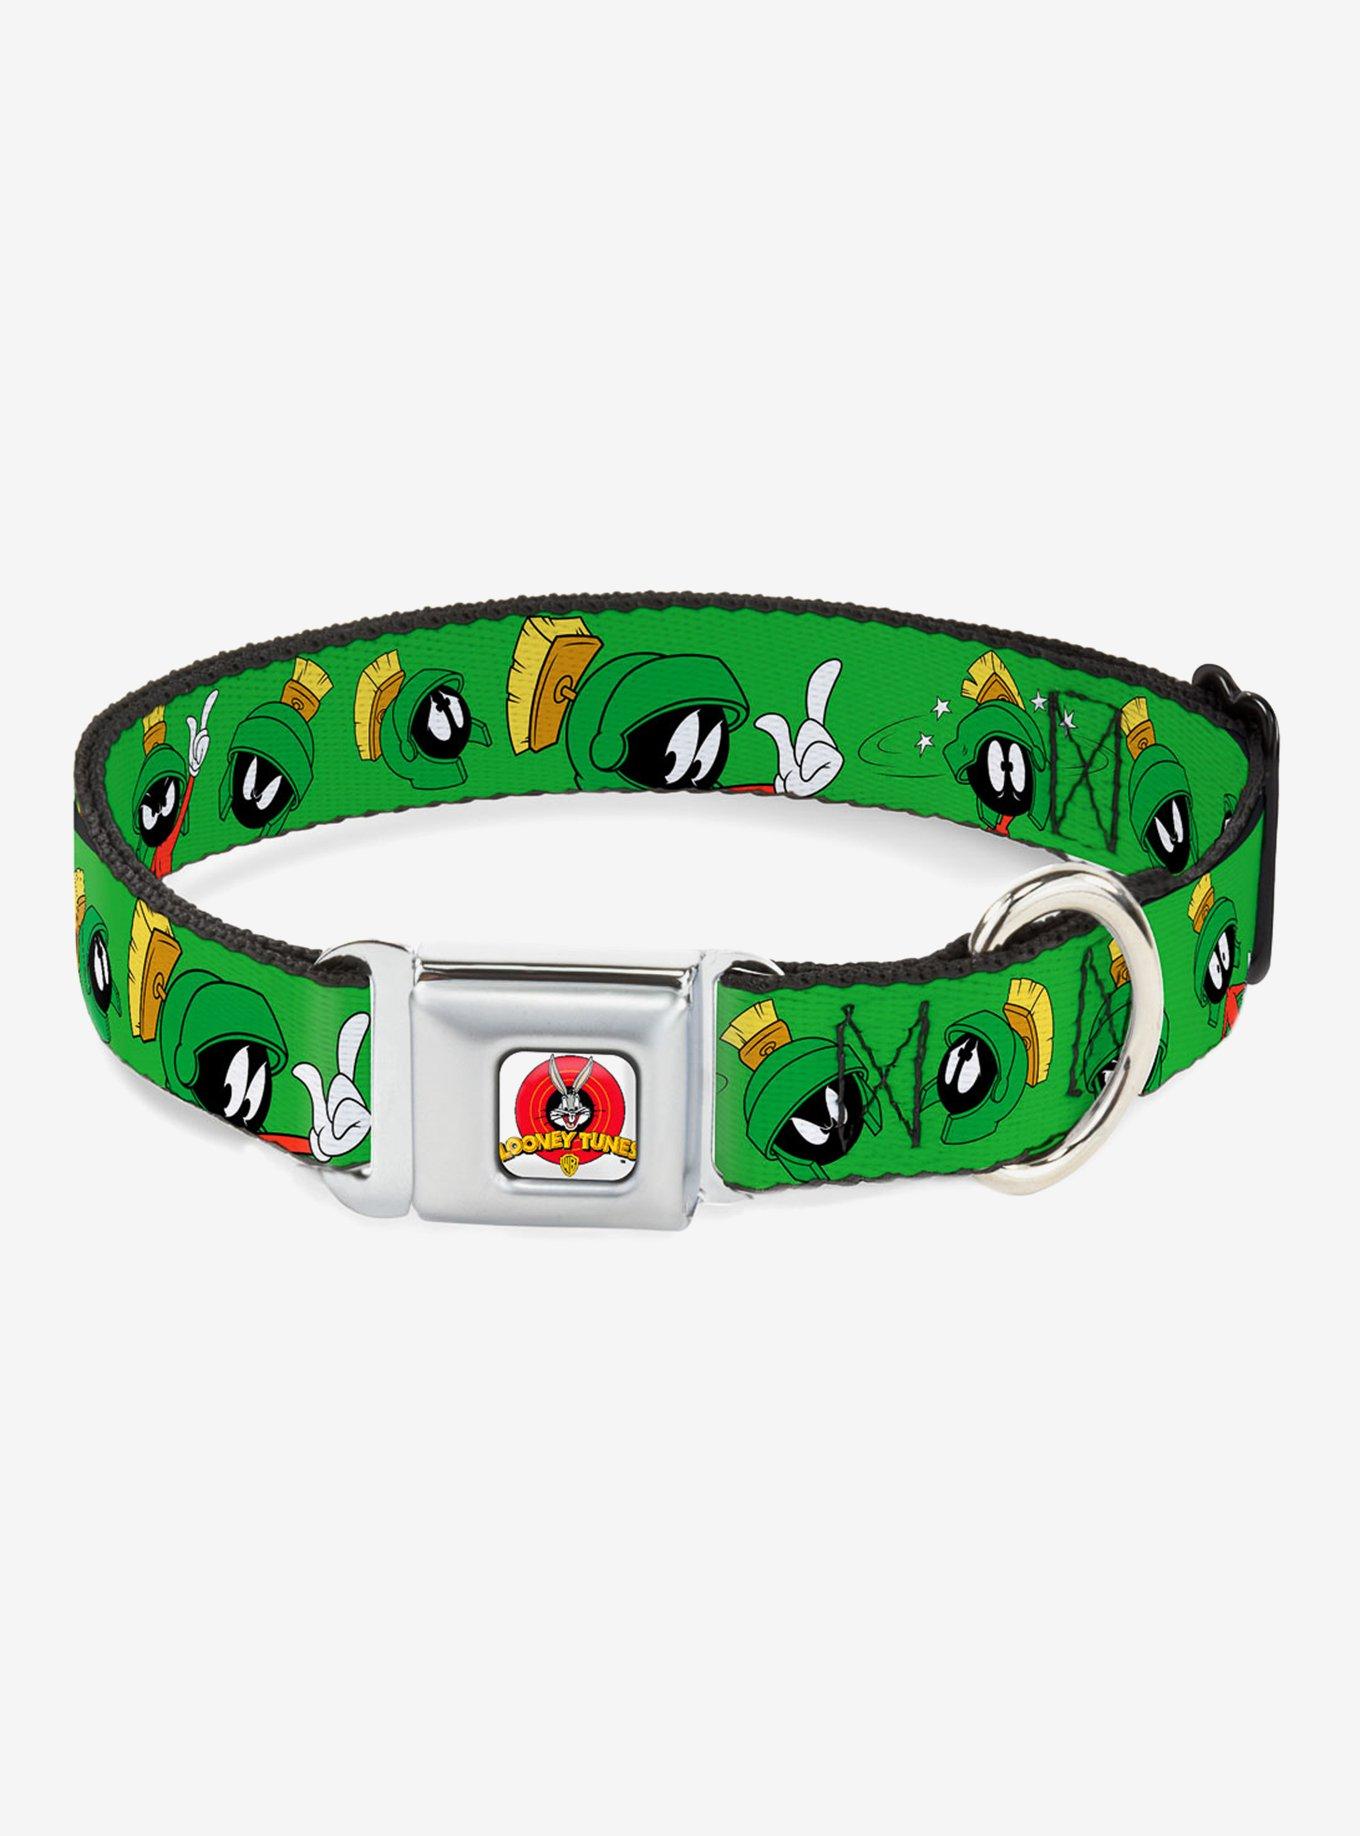 Looney Tunes Marvin The Martian Expressions Green Seatbelt Buckle Dog Collar, GREEN, hi-res